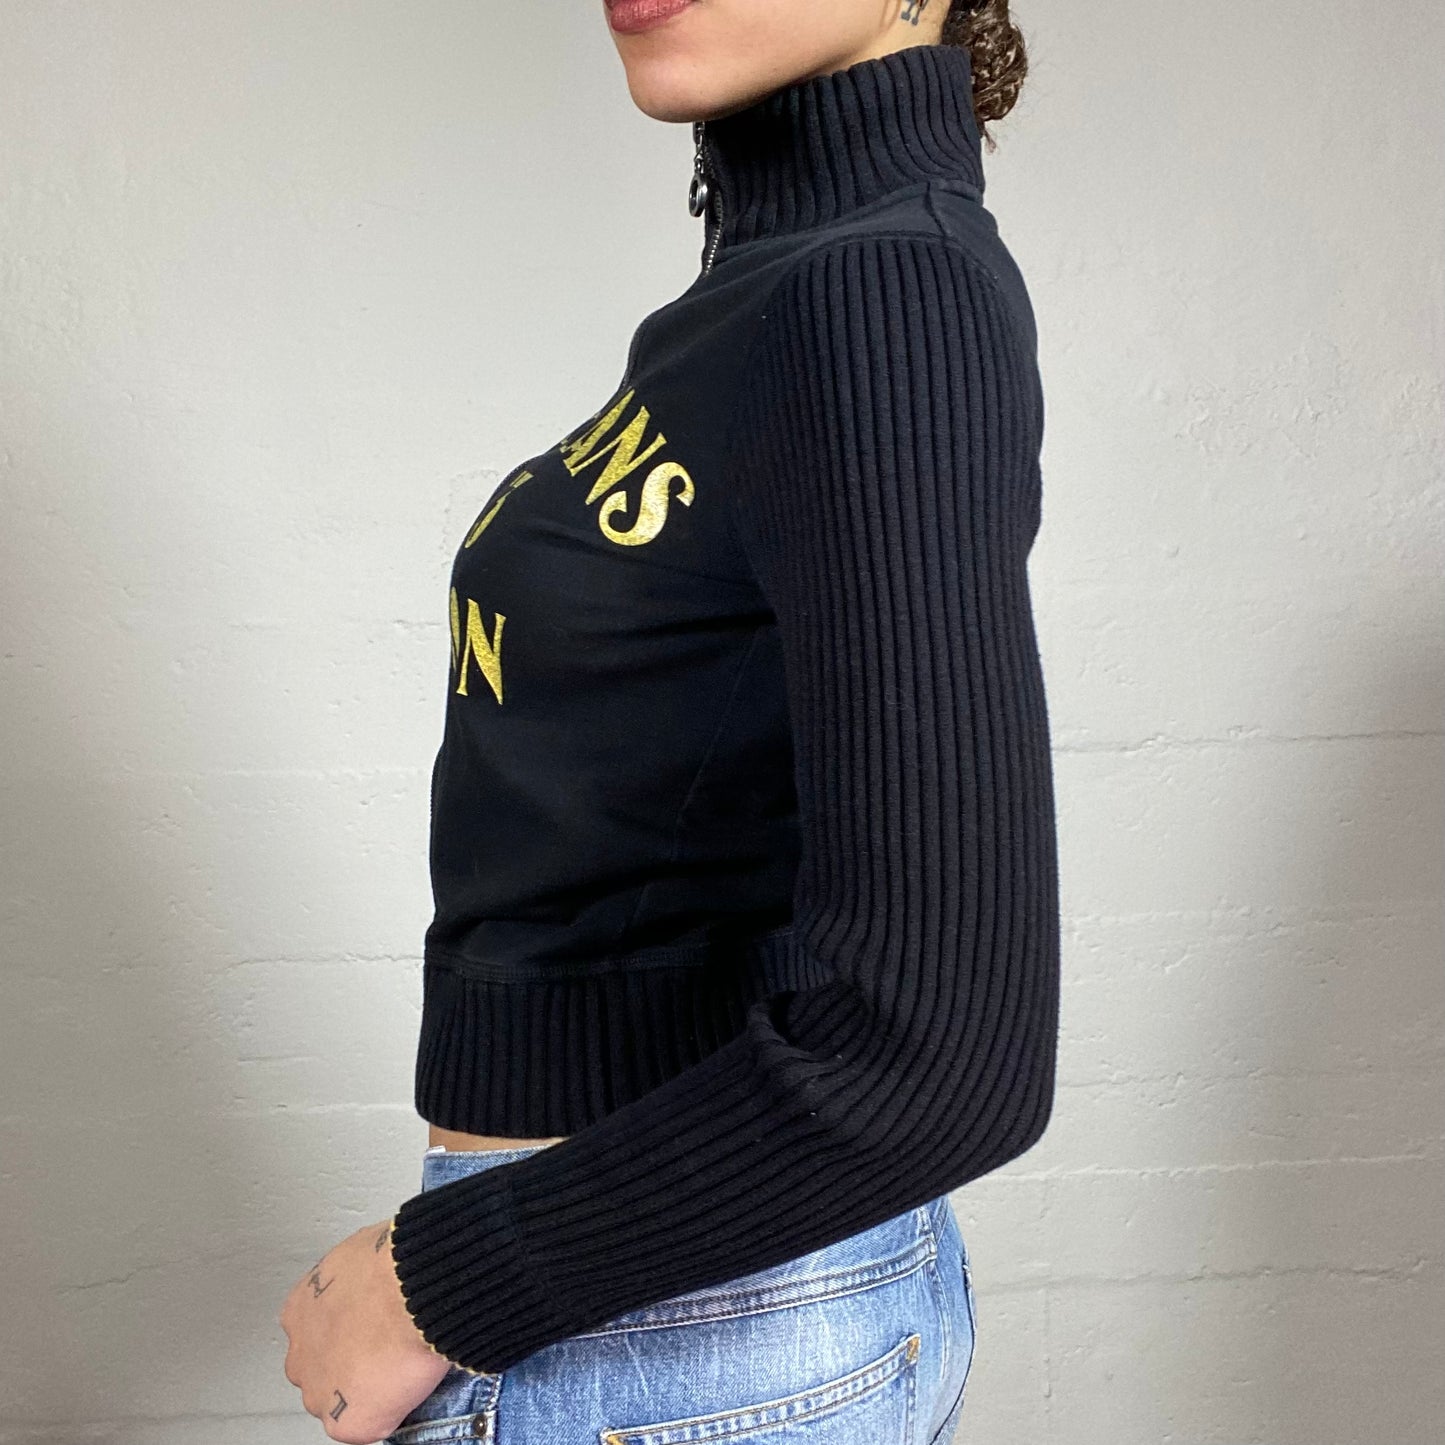 Vintage 2000's Pepe Jeans Downtown Girl Black Zip Up Jacket with Yellow "1973 London" Print (S)